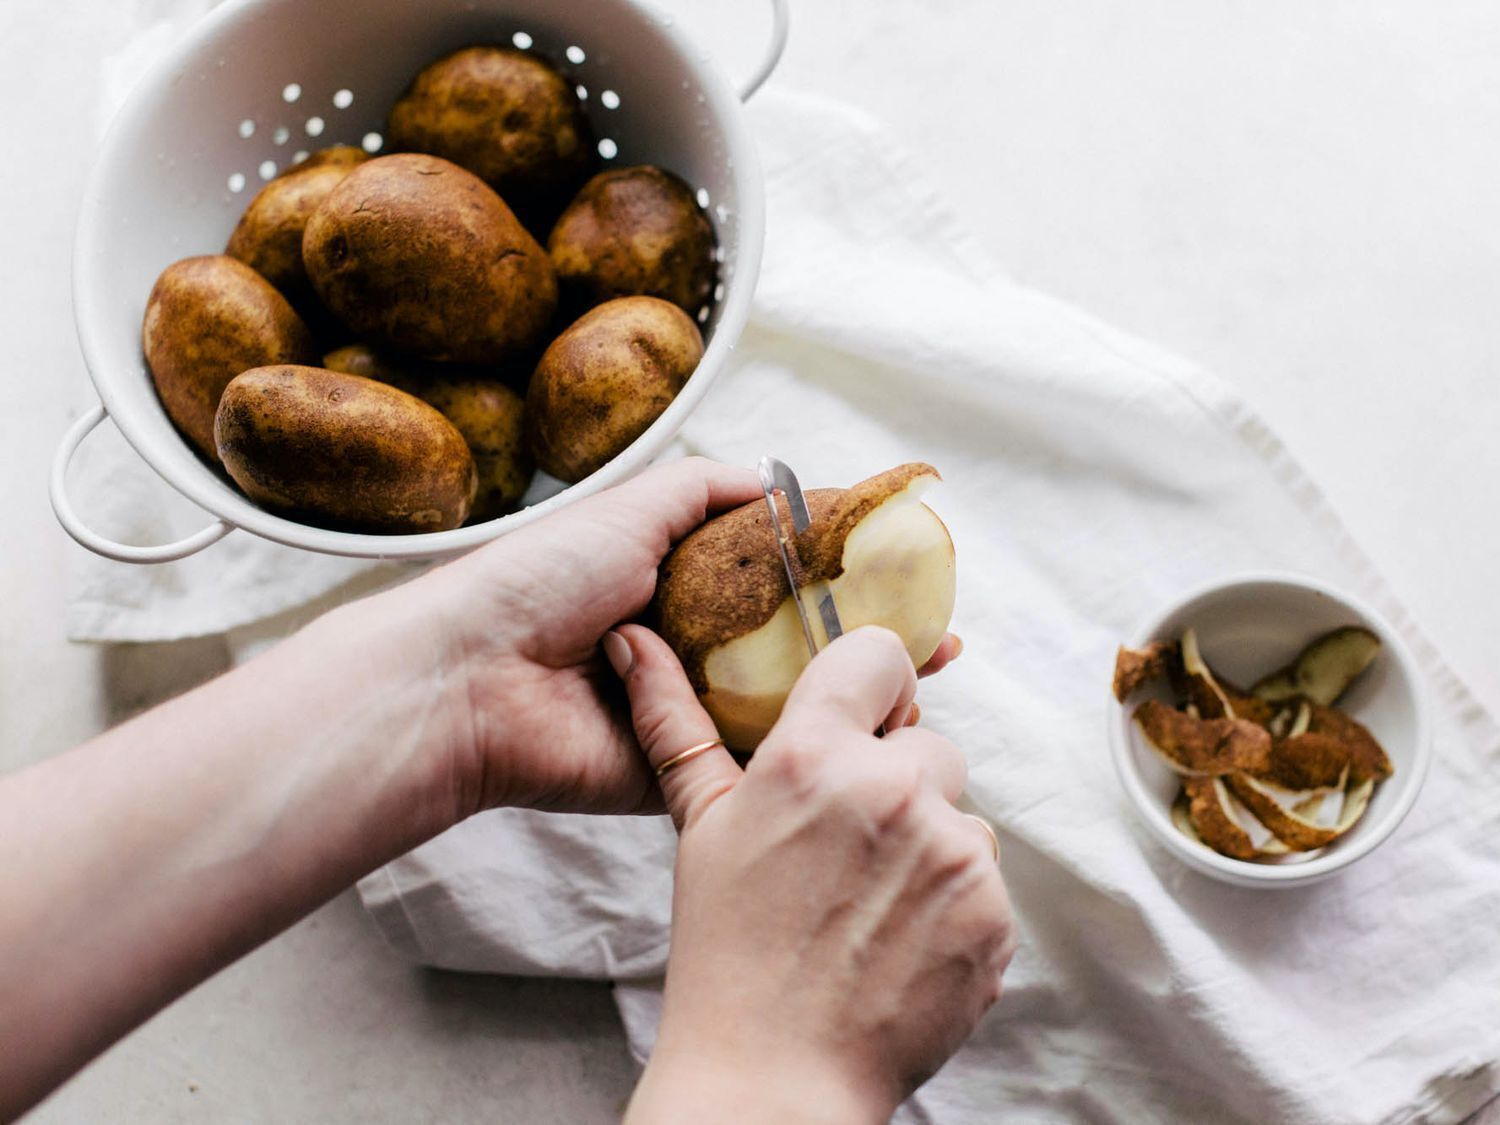 What to add to water when cooking potatoes